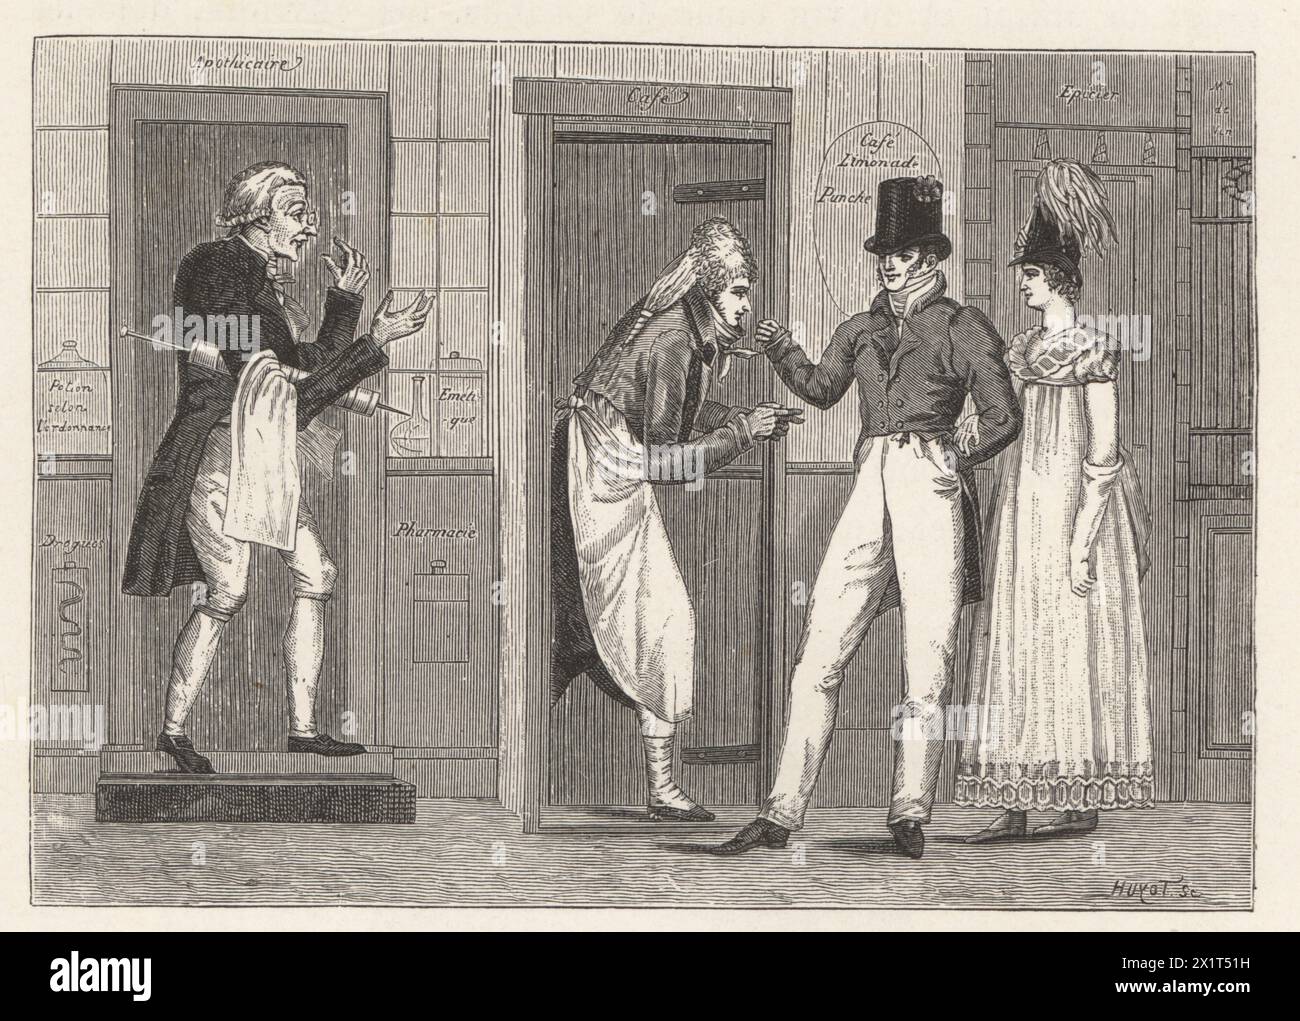 A fashionable couple talk to a waiter at the door to a cafe for Sunday lunch. An apothecary next door holds a large enema syringe. Le dejeuner du dimanche. Woodcut by Huyot from Paul Lacroix's Directoire, Consulat et Empire, (Directory, Consulate and Empire), Paris, 1884. Stock Photo